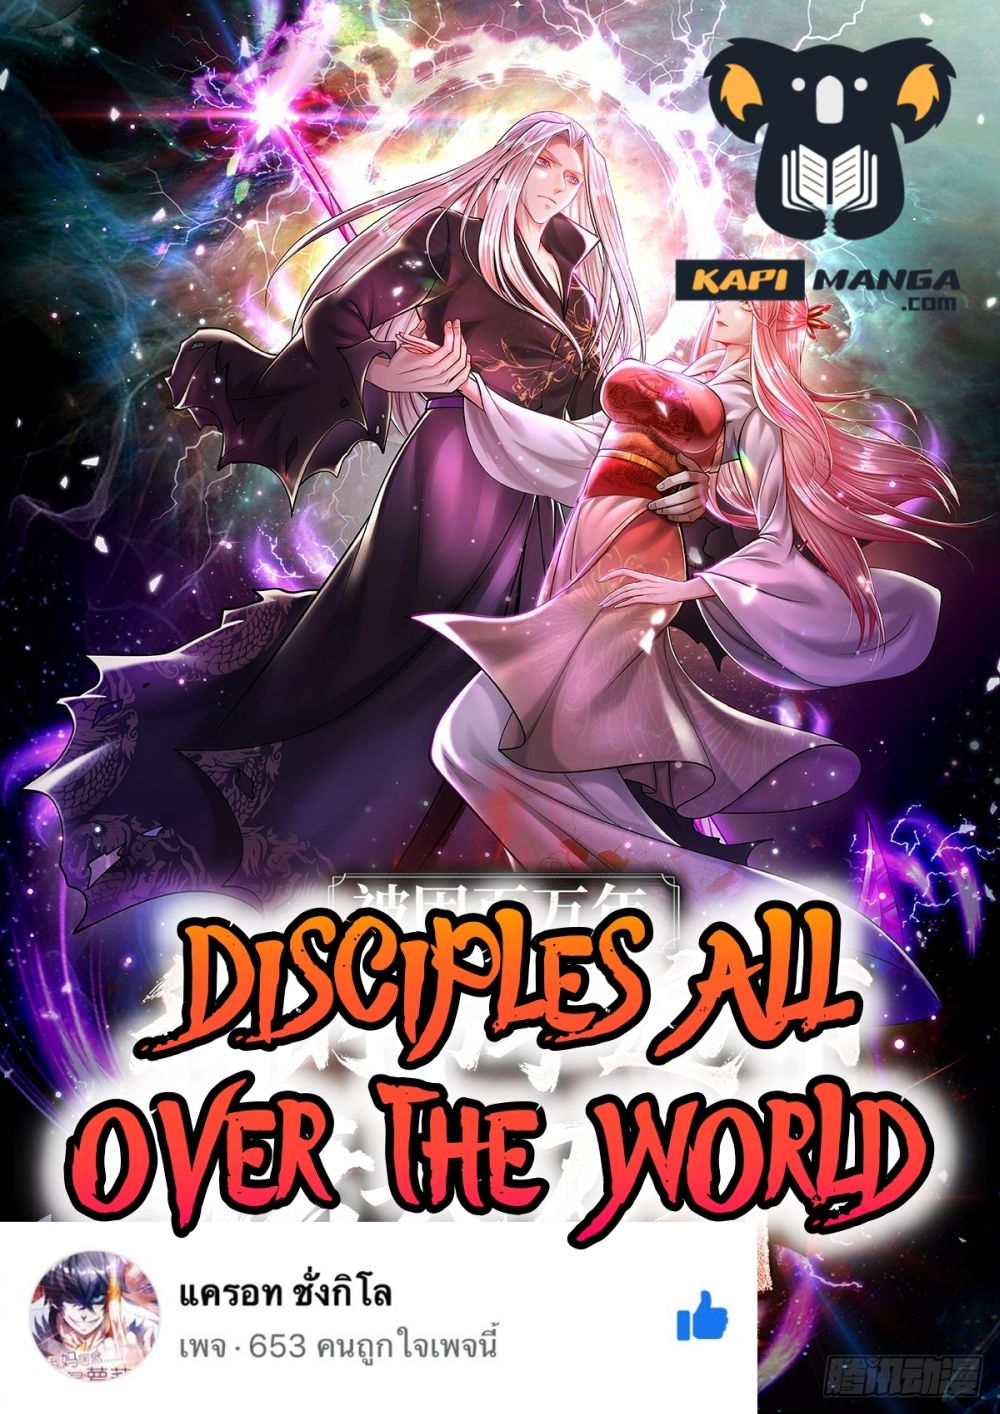 Disciples All Over the World à¸à¸­à¸à¸à¸µà¹ 23 (1)